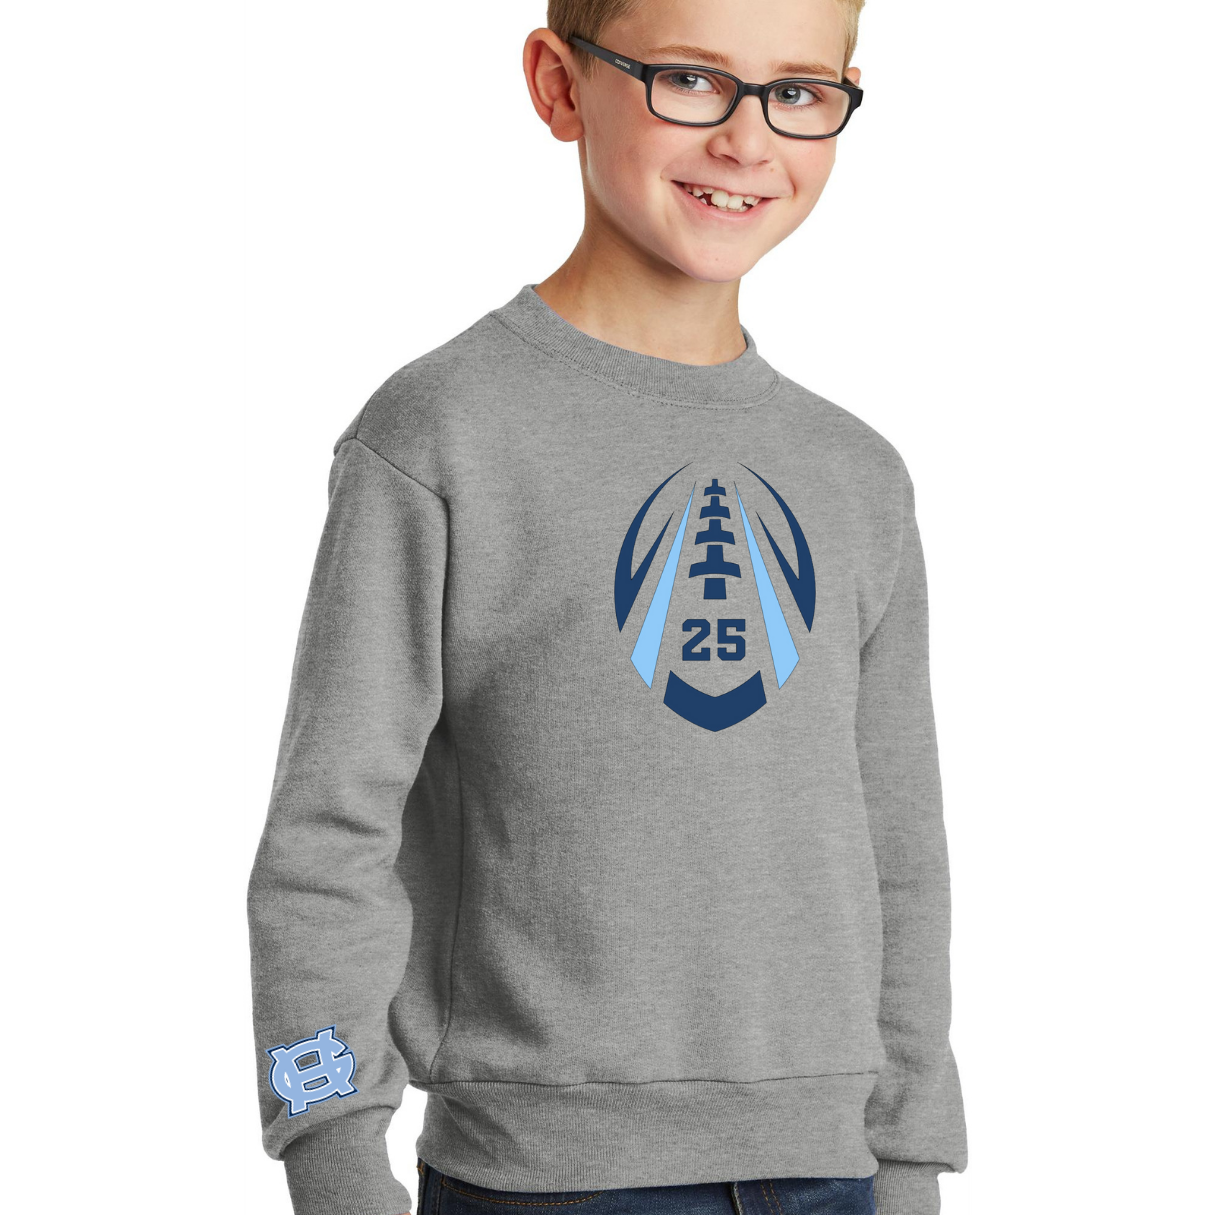 Tides Football Favorite Player Crewneck- Adult and Youth